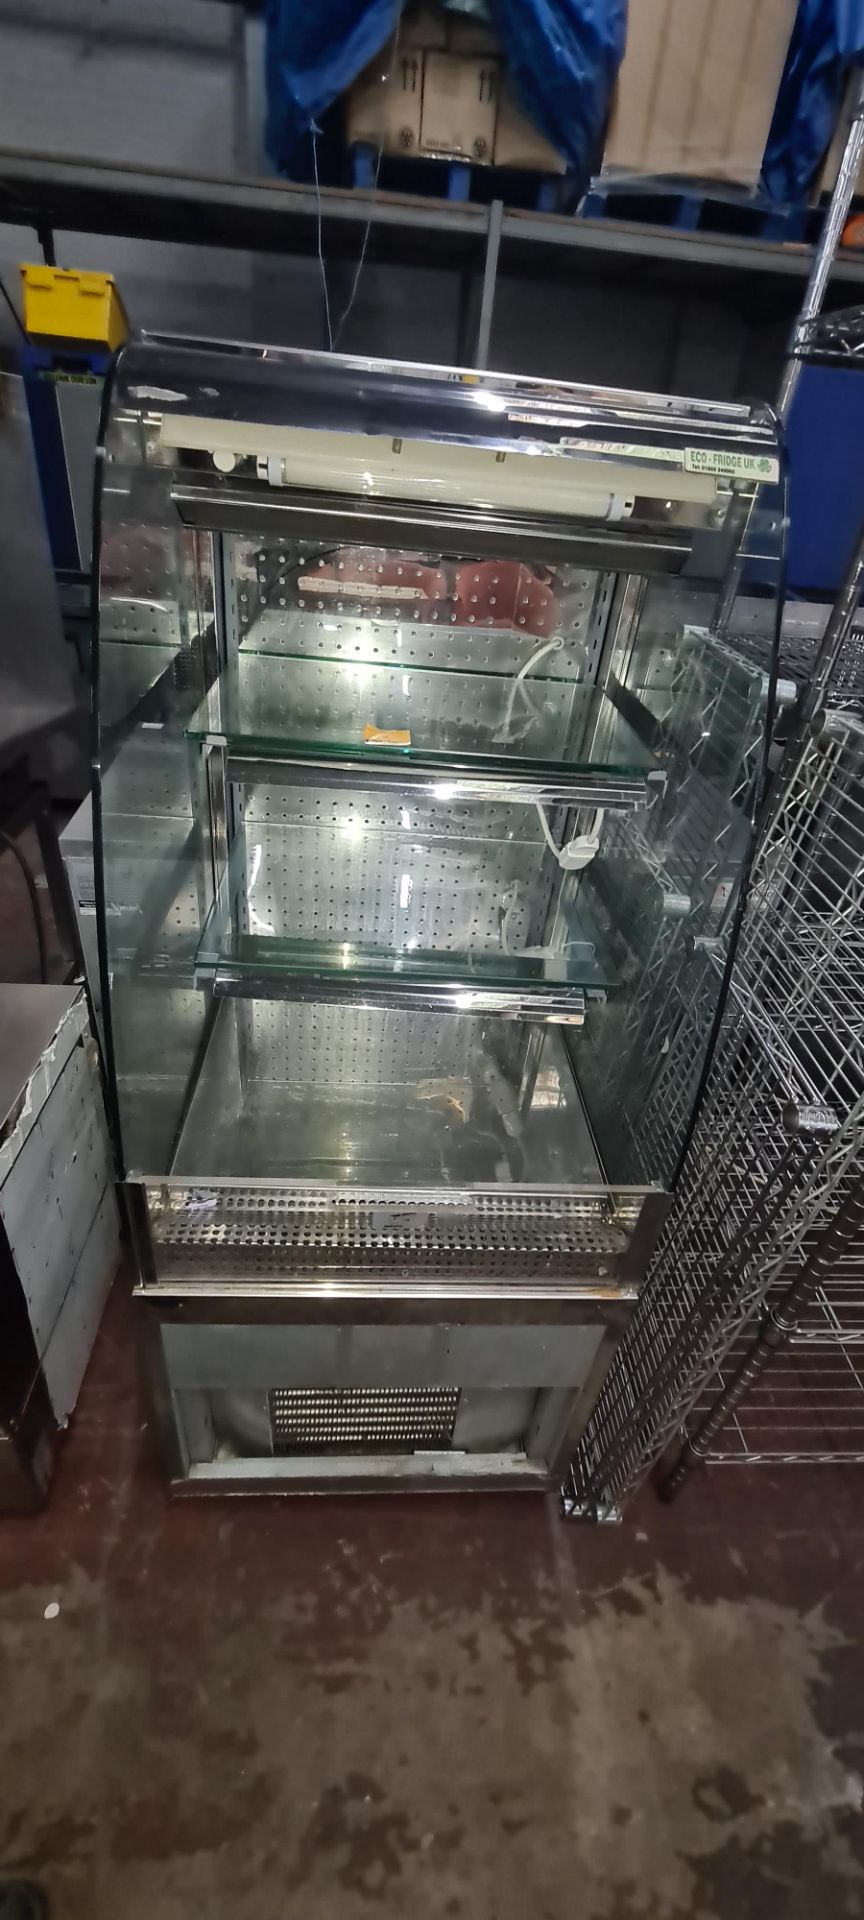 Stainless steel & glass open front retail display fridge